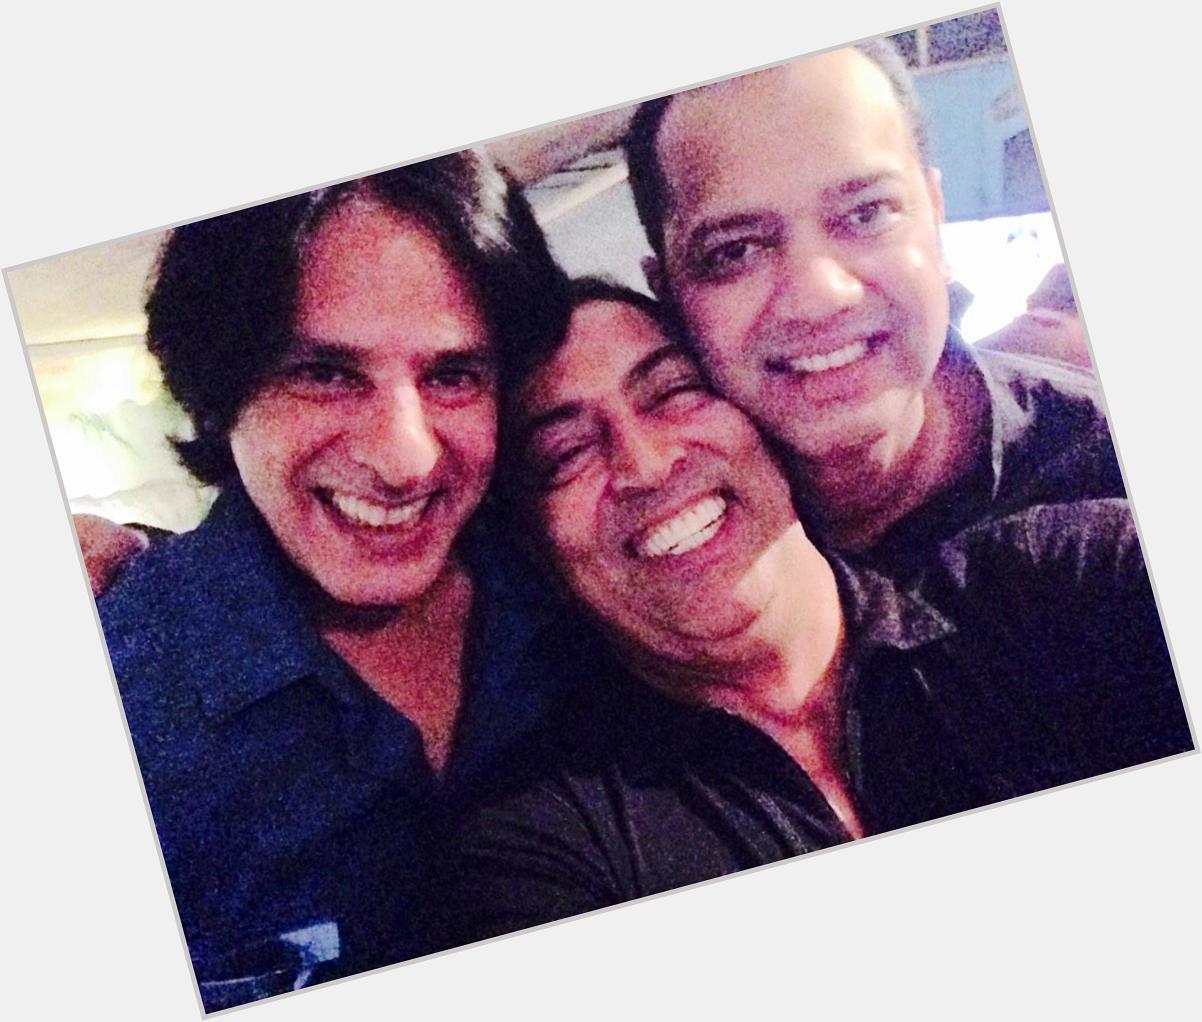 Happy birthday with bb gang and Rahul roy 